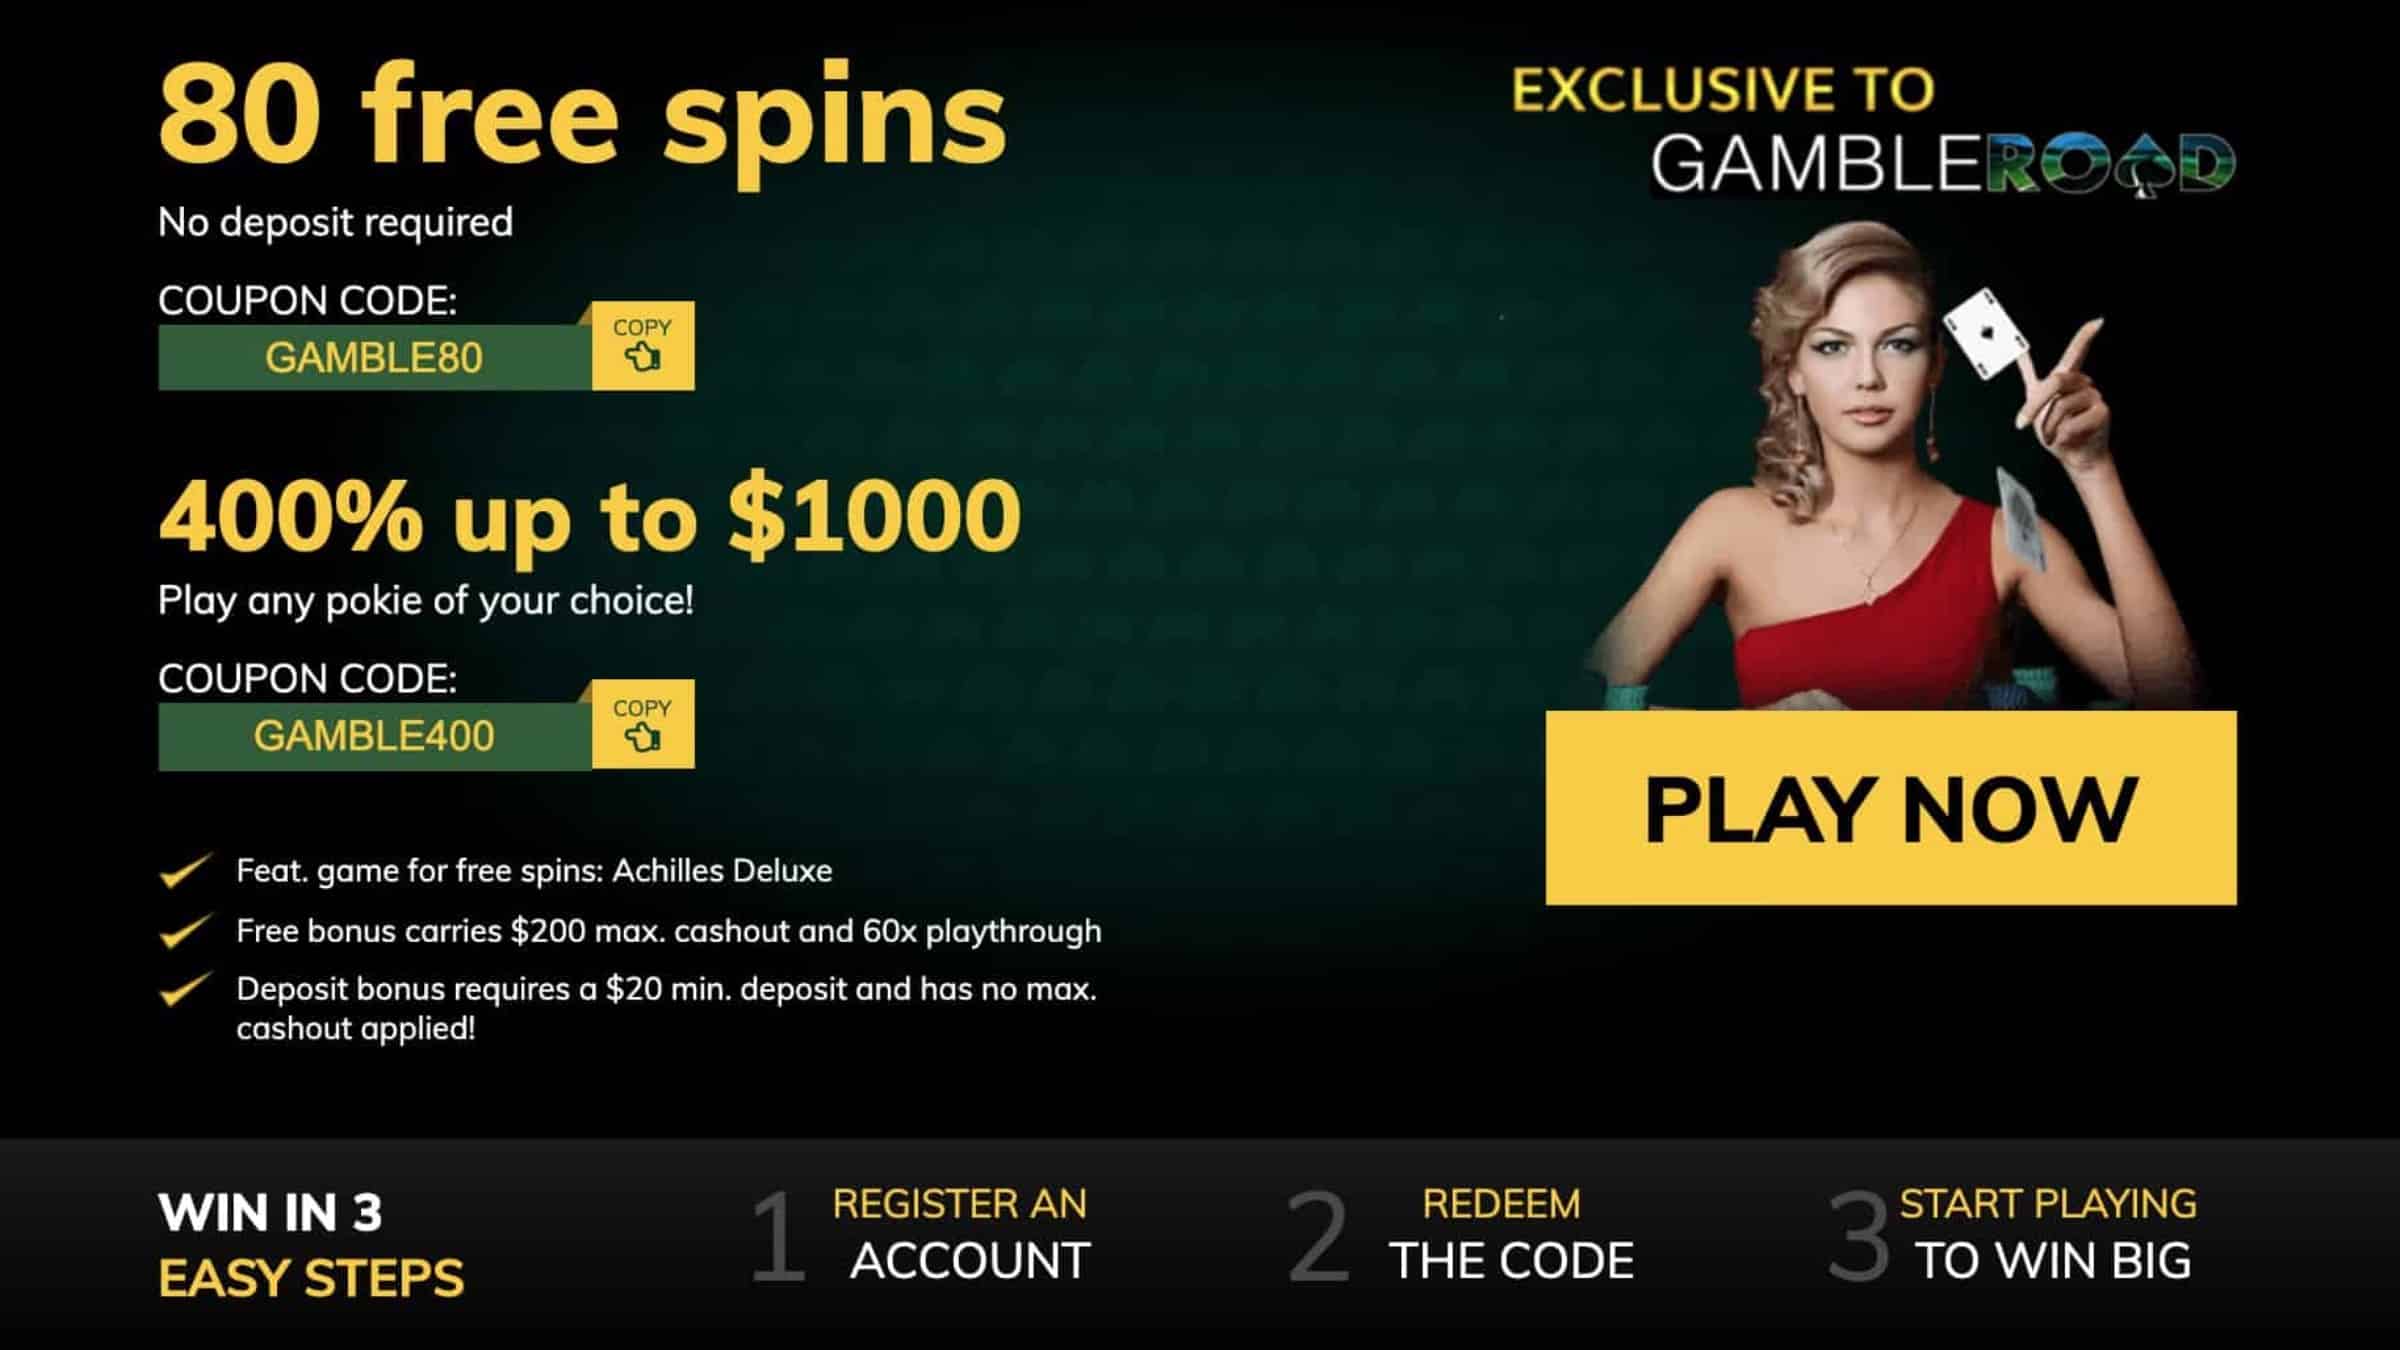 Resorts online casino $20 free up to $1,000 on deposit Protection play poker machines